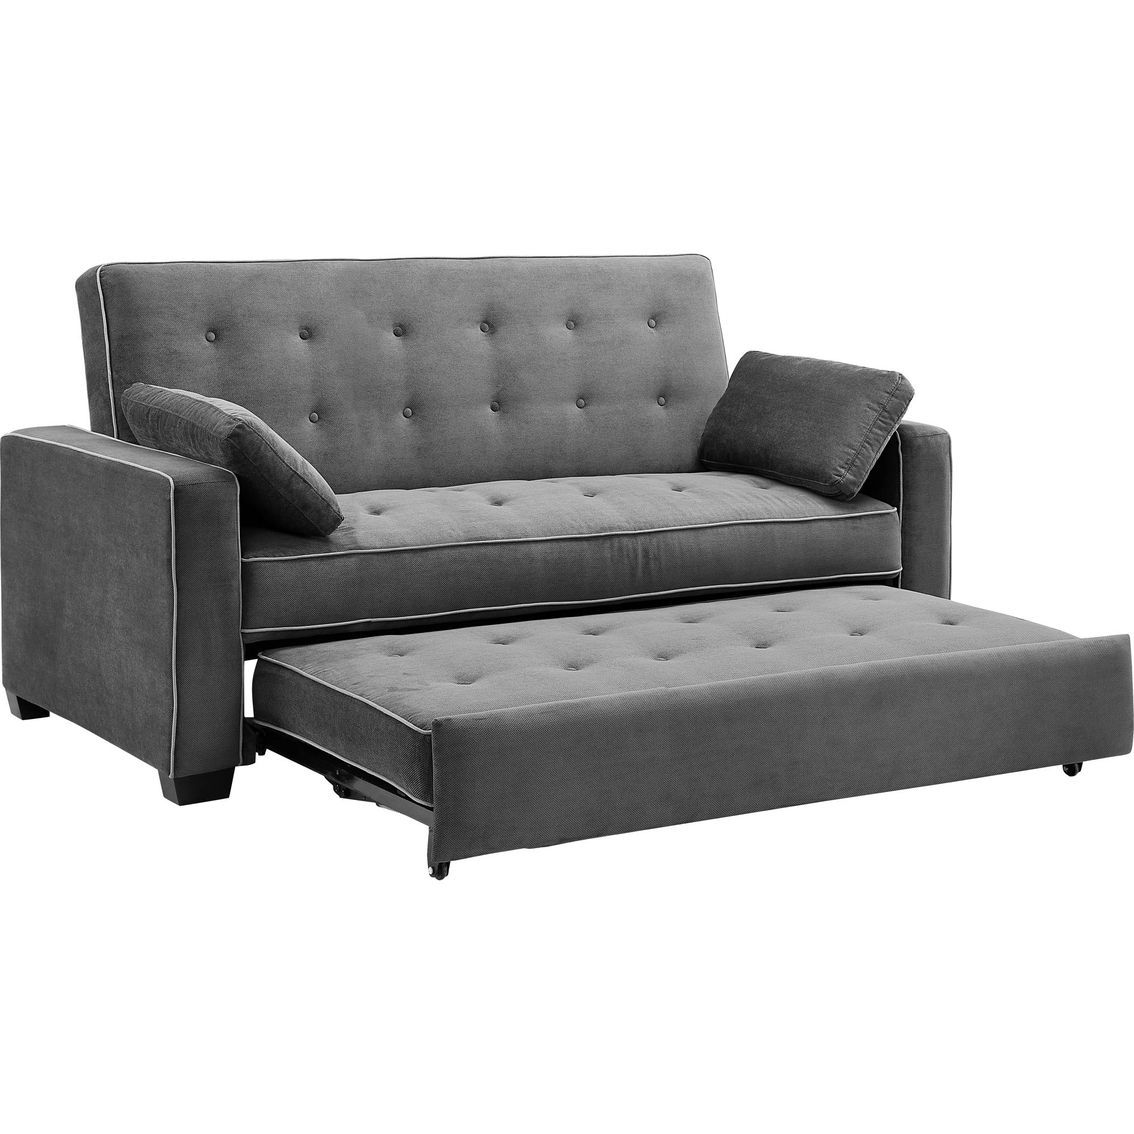 6 * 5 Feet Grey Convertible Sofa Bed, Rs 23000 /unit Viswak Enterprise For Convertible Light Gray Chair Beds (Gallery 14 of 20)